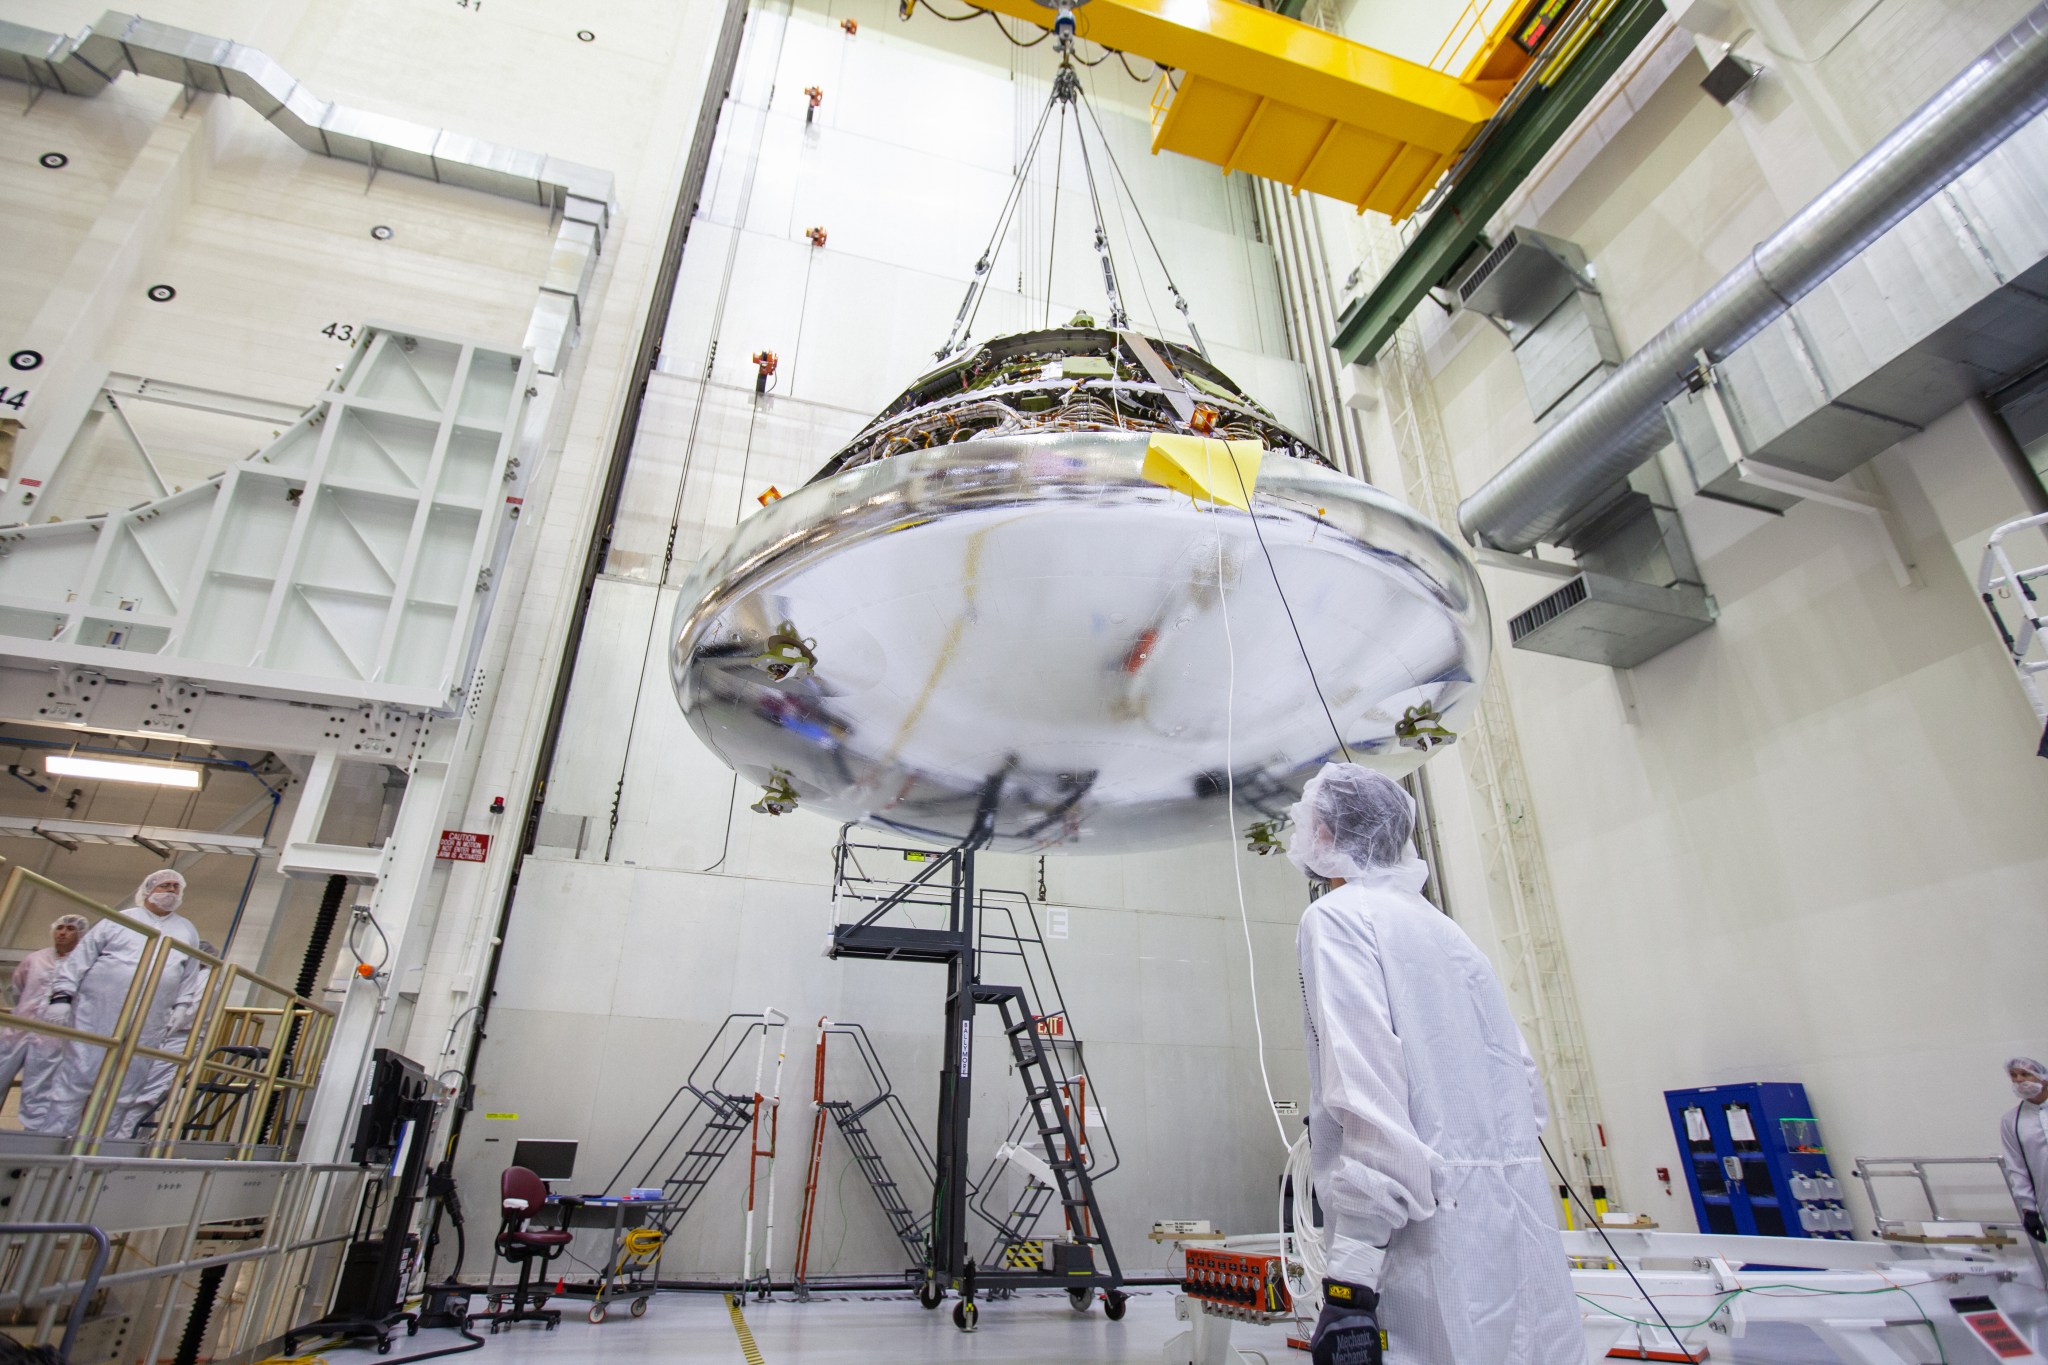 The Orion crew module for Artemis 1 is lifted by crane on July 16, 2019, in the high bay inside the Neil Armstrong Operations and Checkout Building.